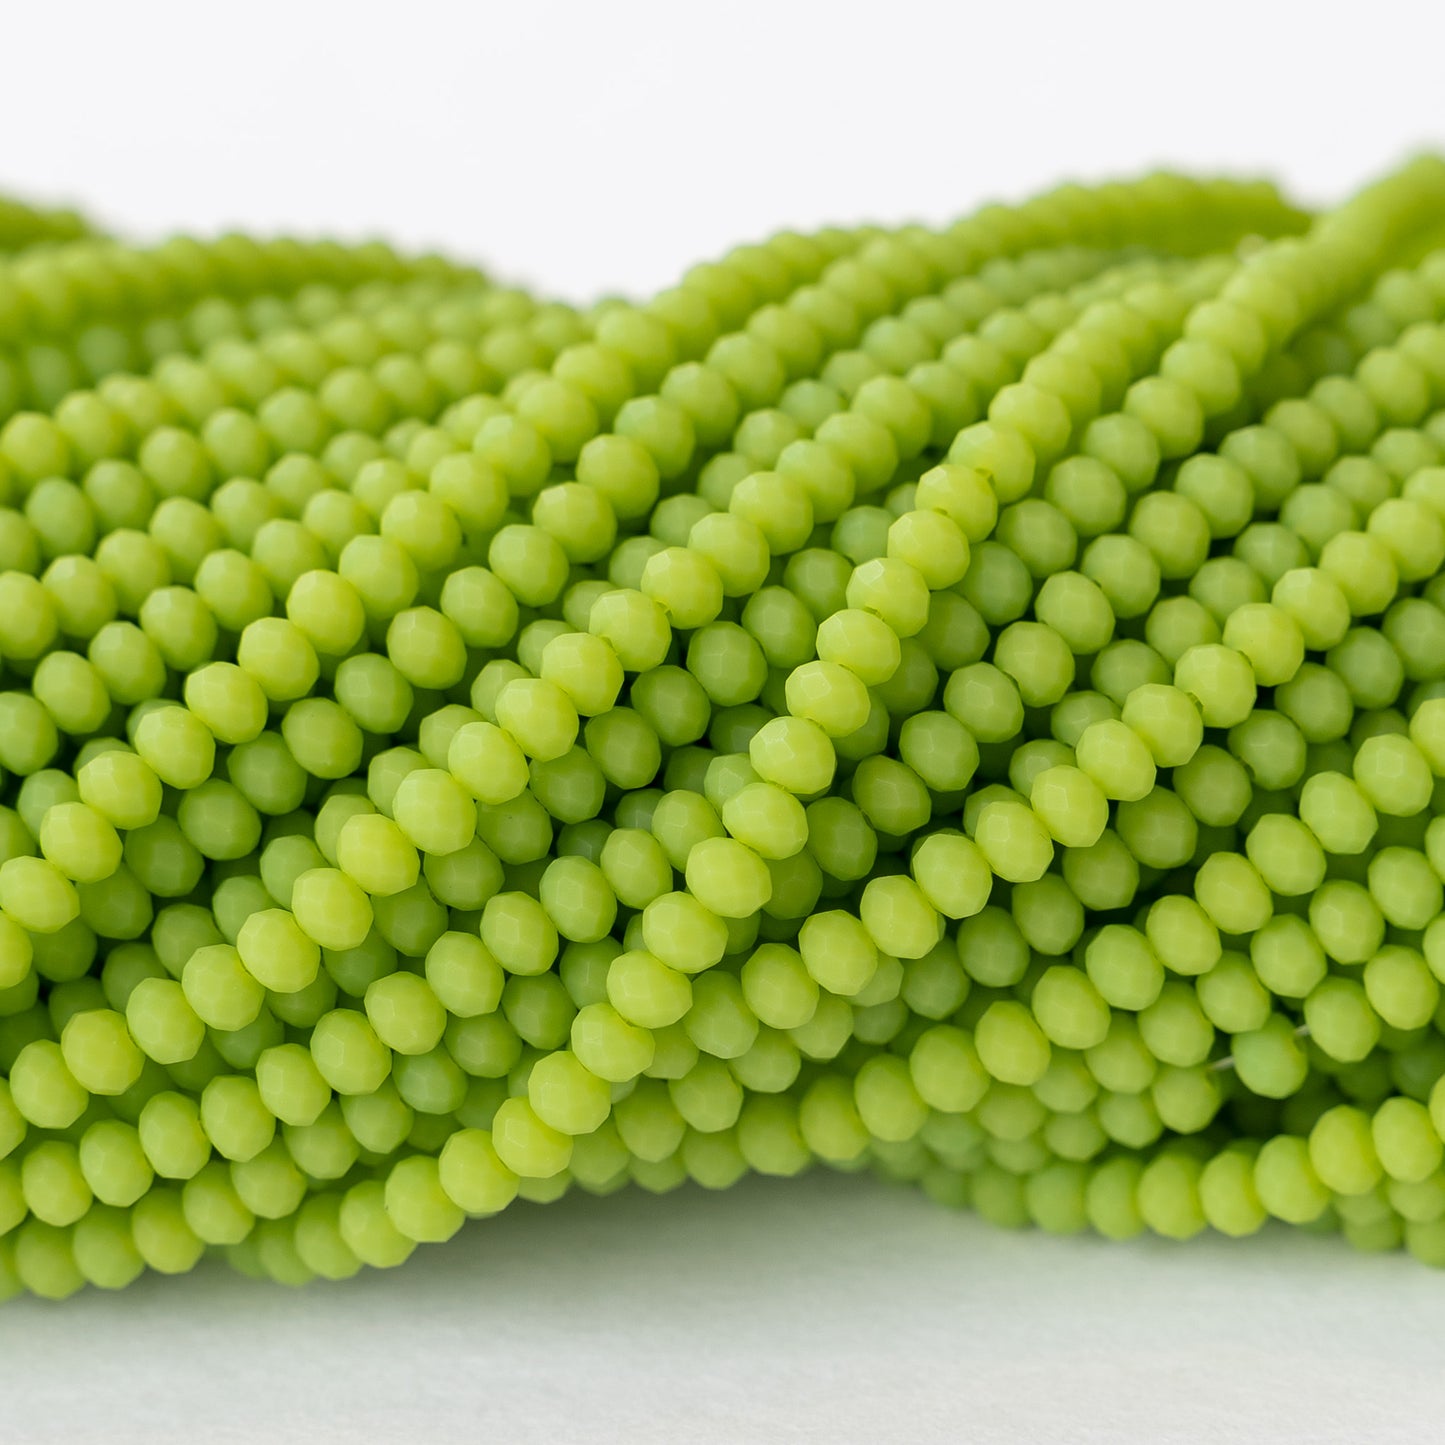 3x2mm Faceted Glass Rondelle Beads - Matte Lime Green - 16 Inches